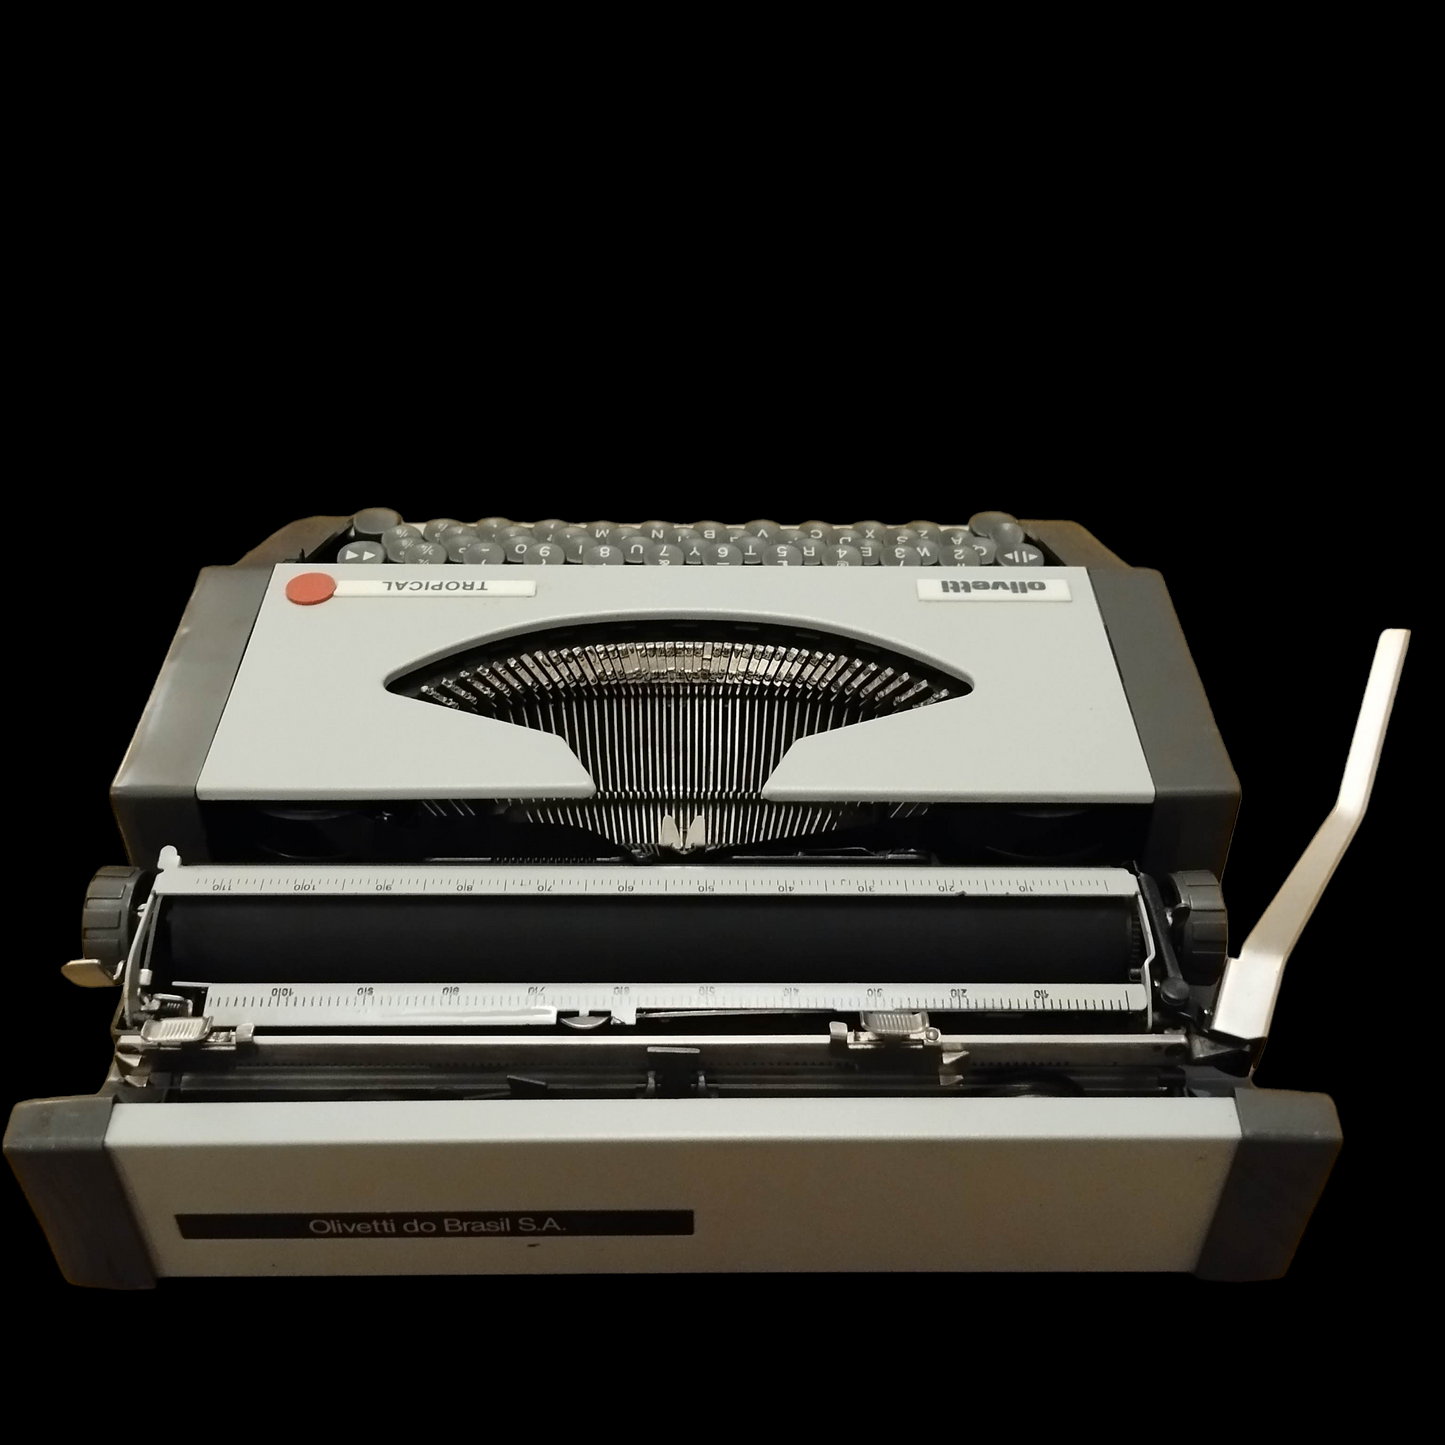 Image of Olivetti Tropical Typewriter. Available from universaltypewritercompany.in